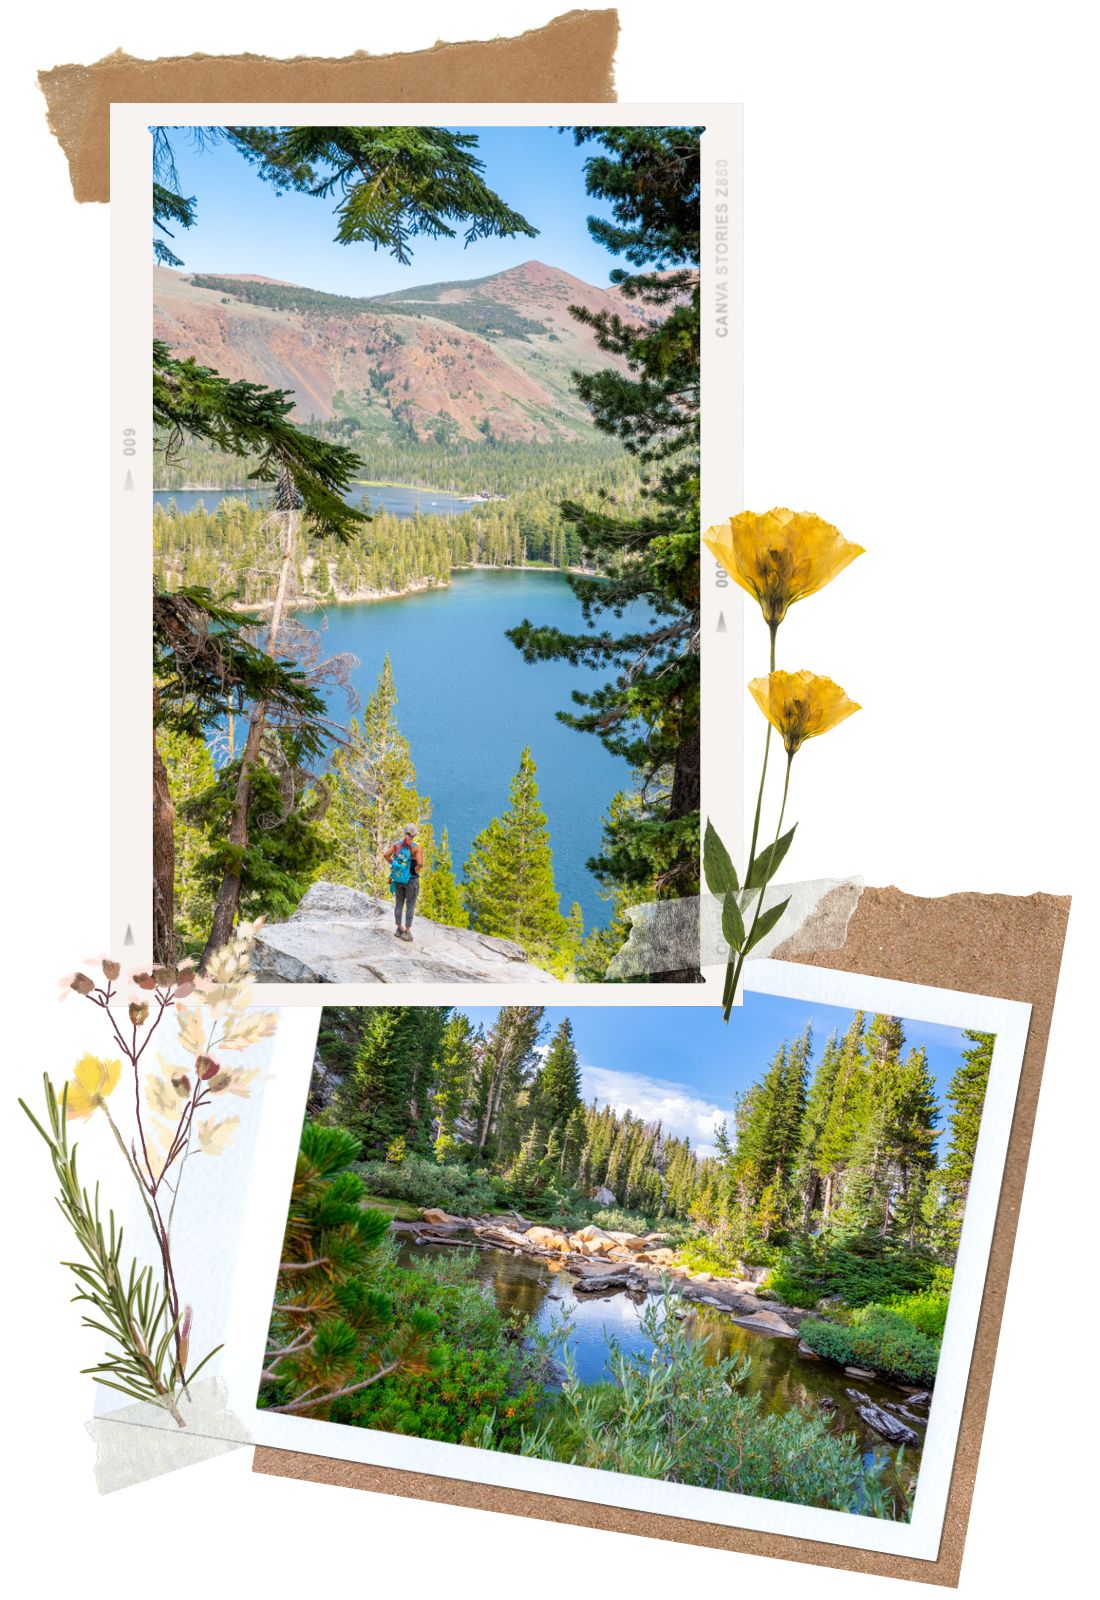 Crystal Lake Trail - 9 Beautiful Beginner Hikes in (and Around) Mammoth Lakes